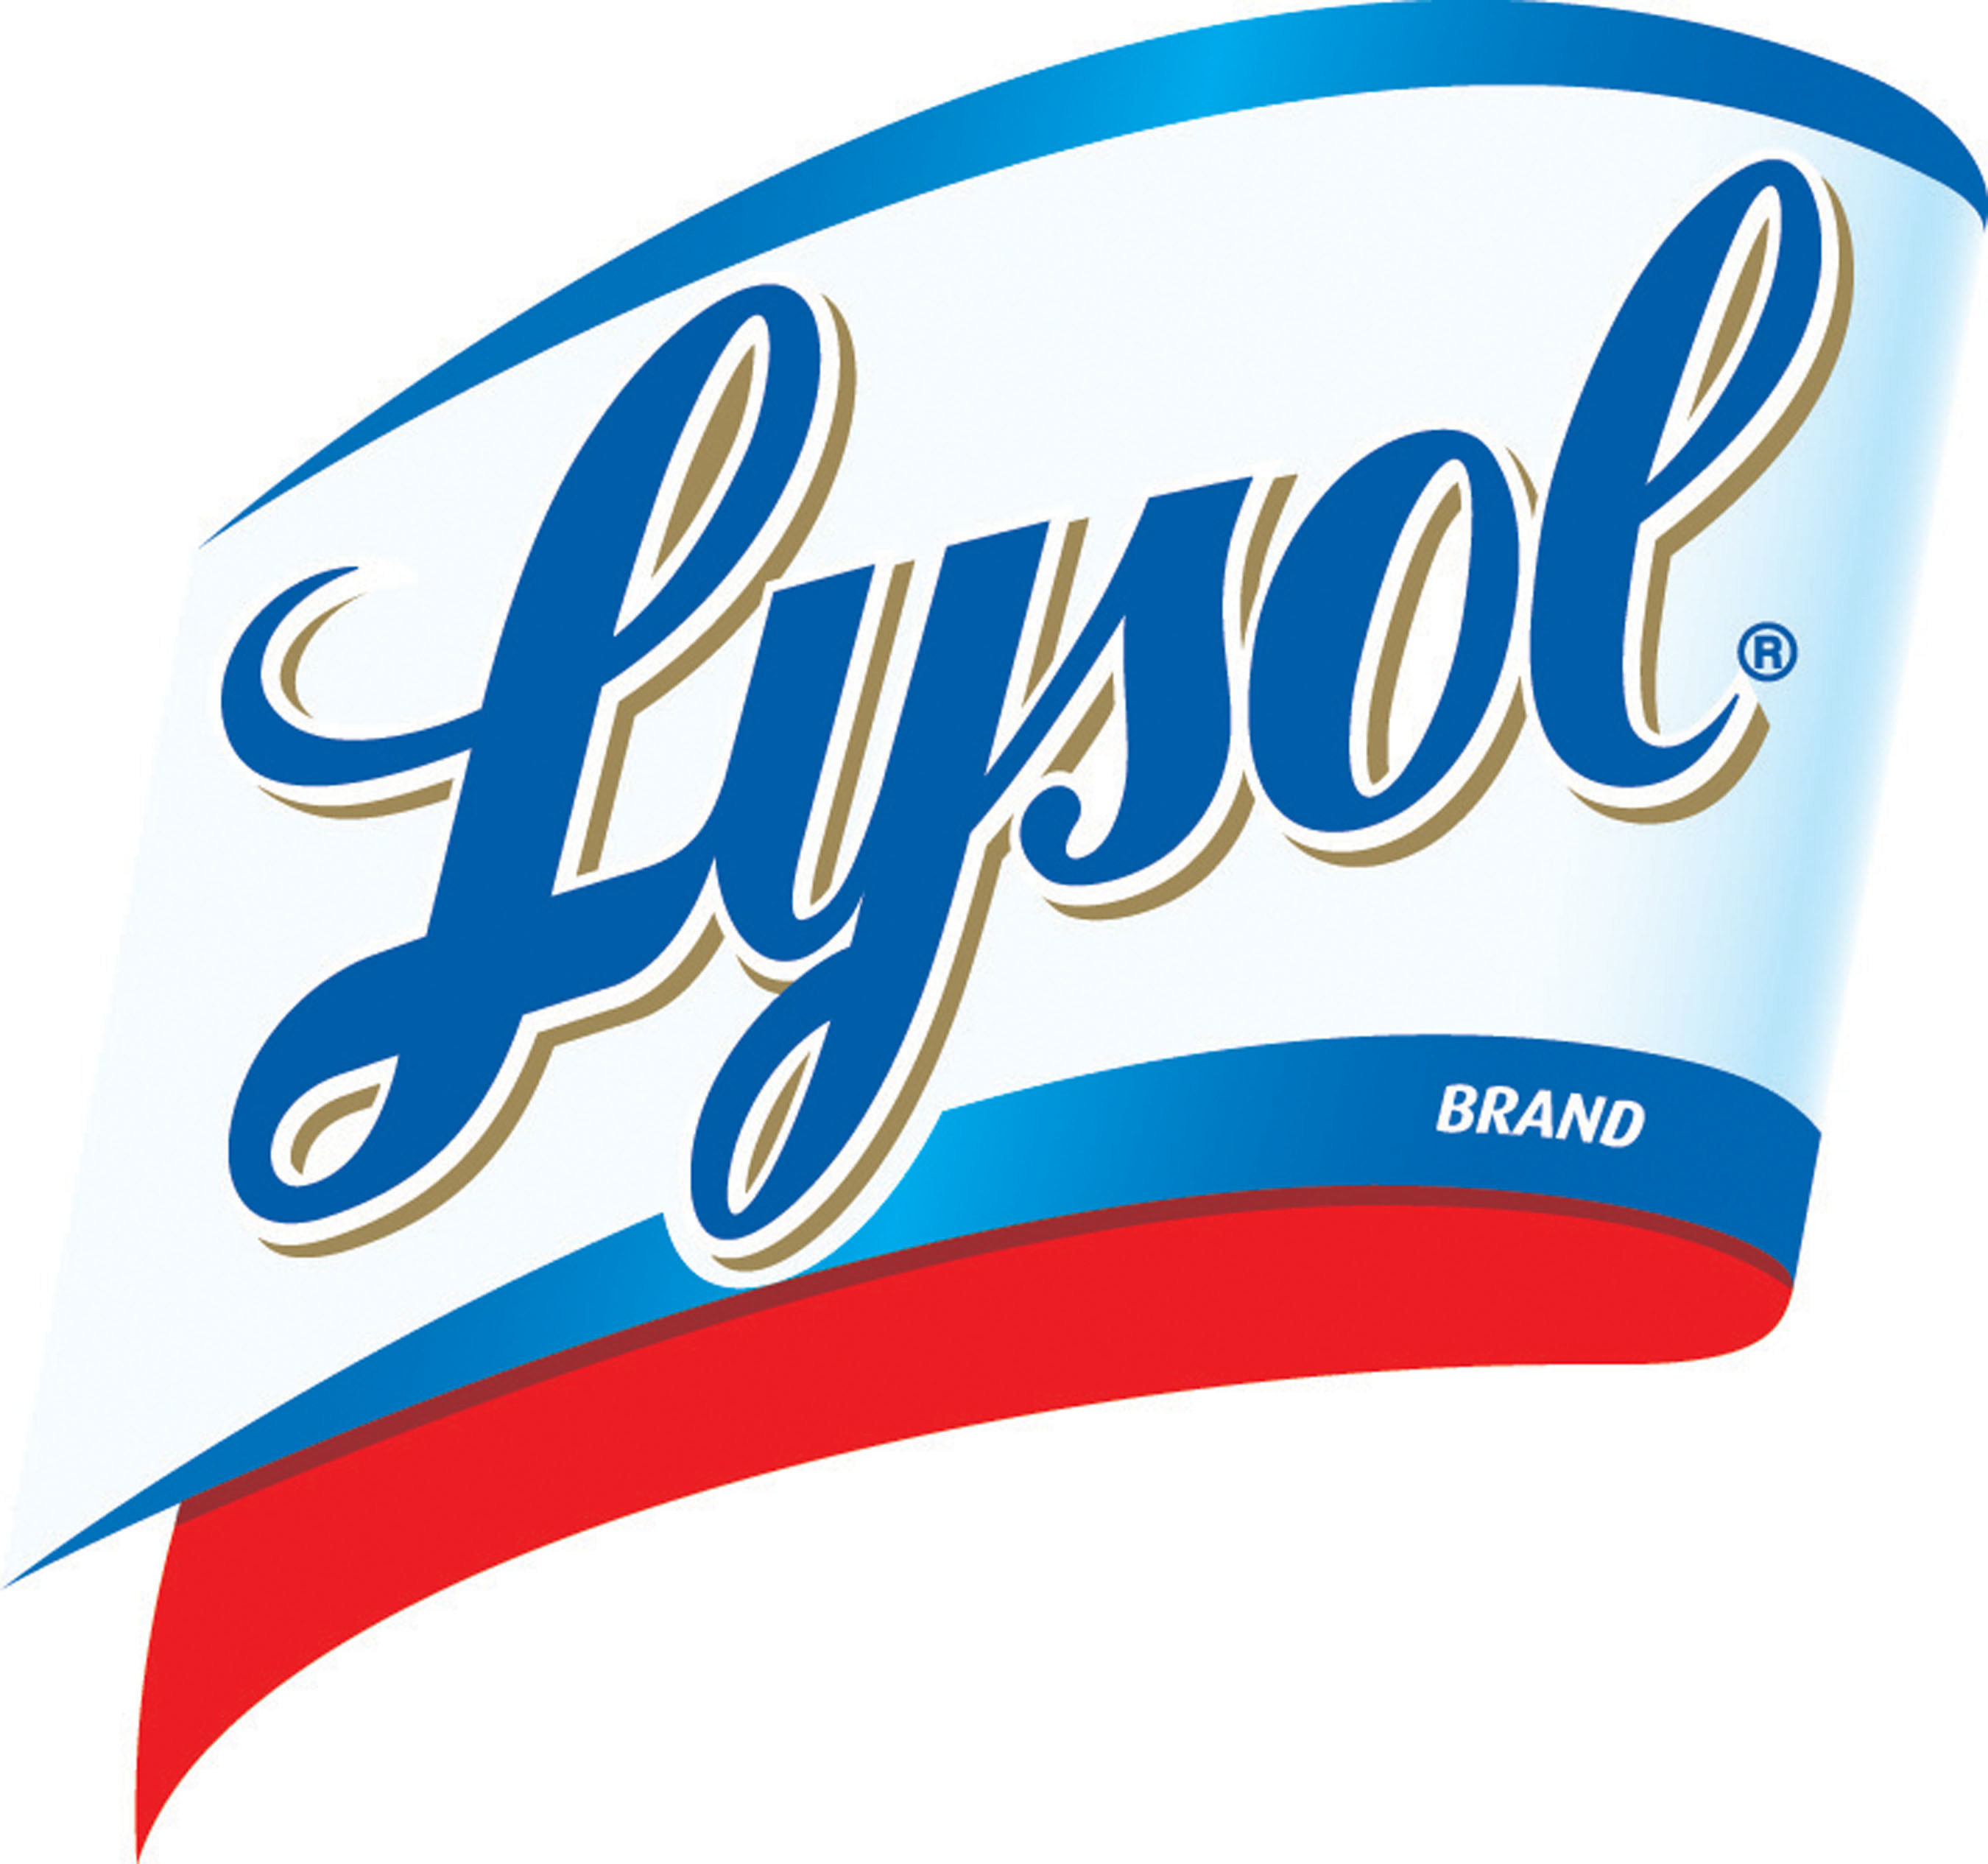 LYSOL(R) TEAMS UP WITH BOX TOPS FOR EDUCATION TO SUPPORT SCHOOLS ONE CLEAN SURFACE AT A TIME